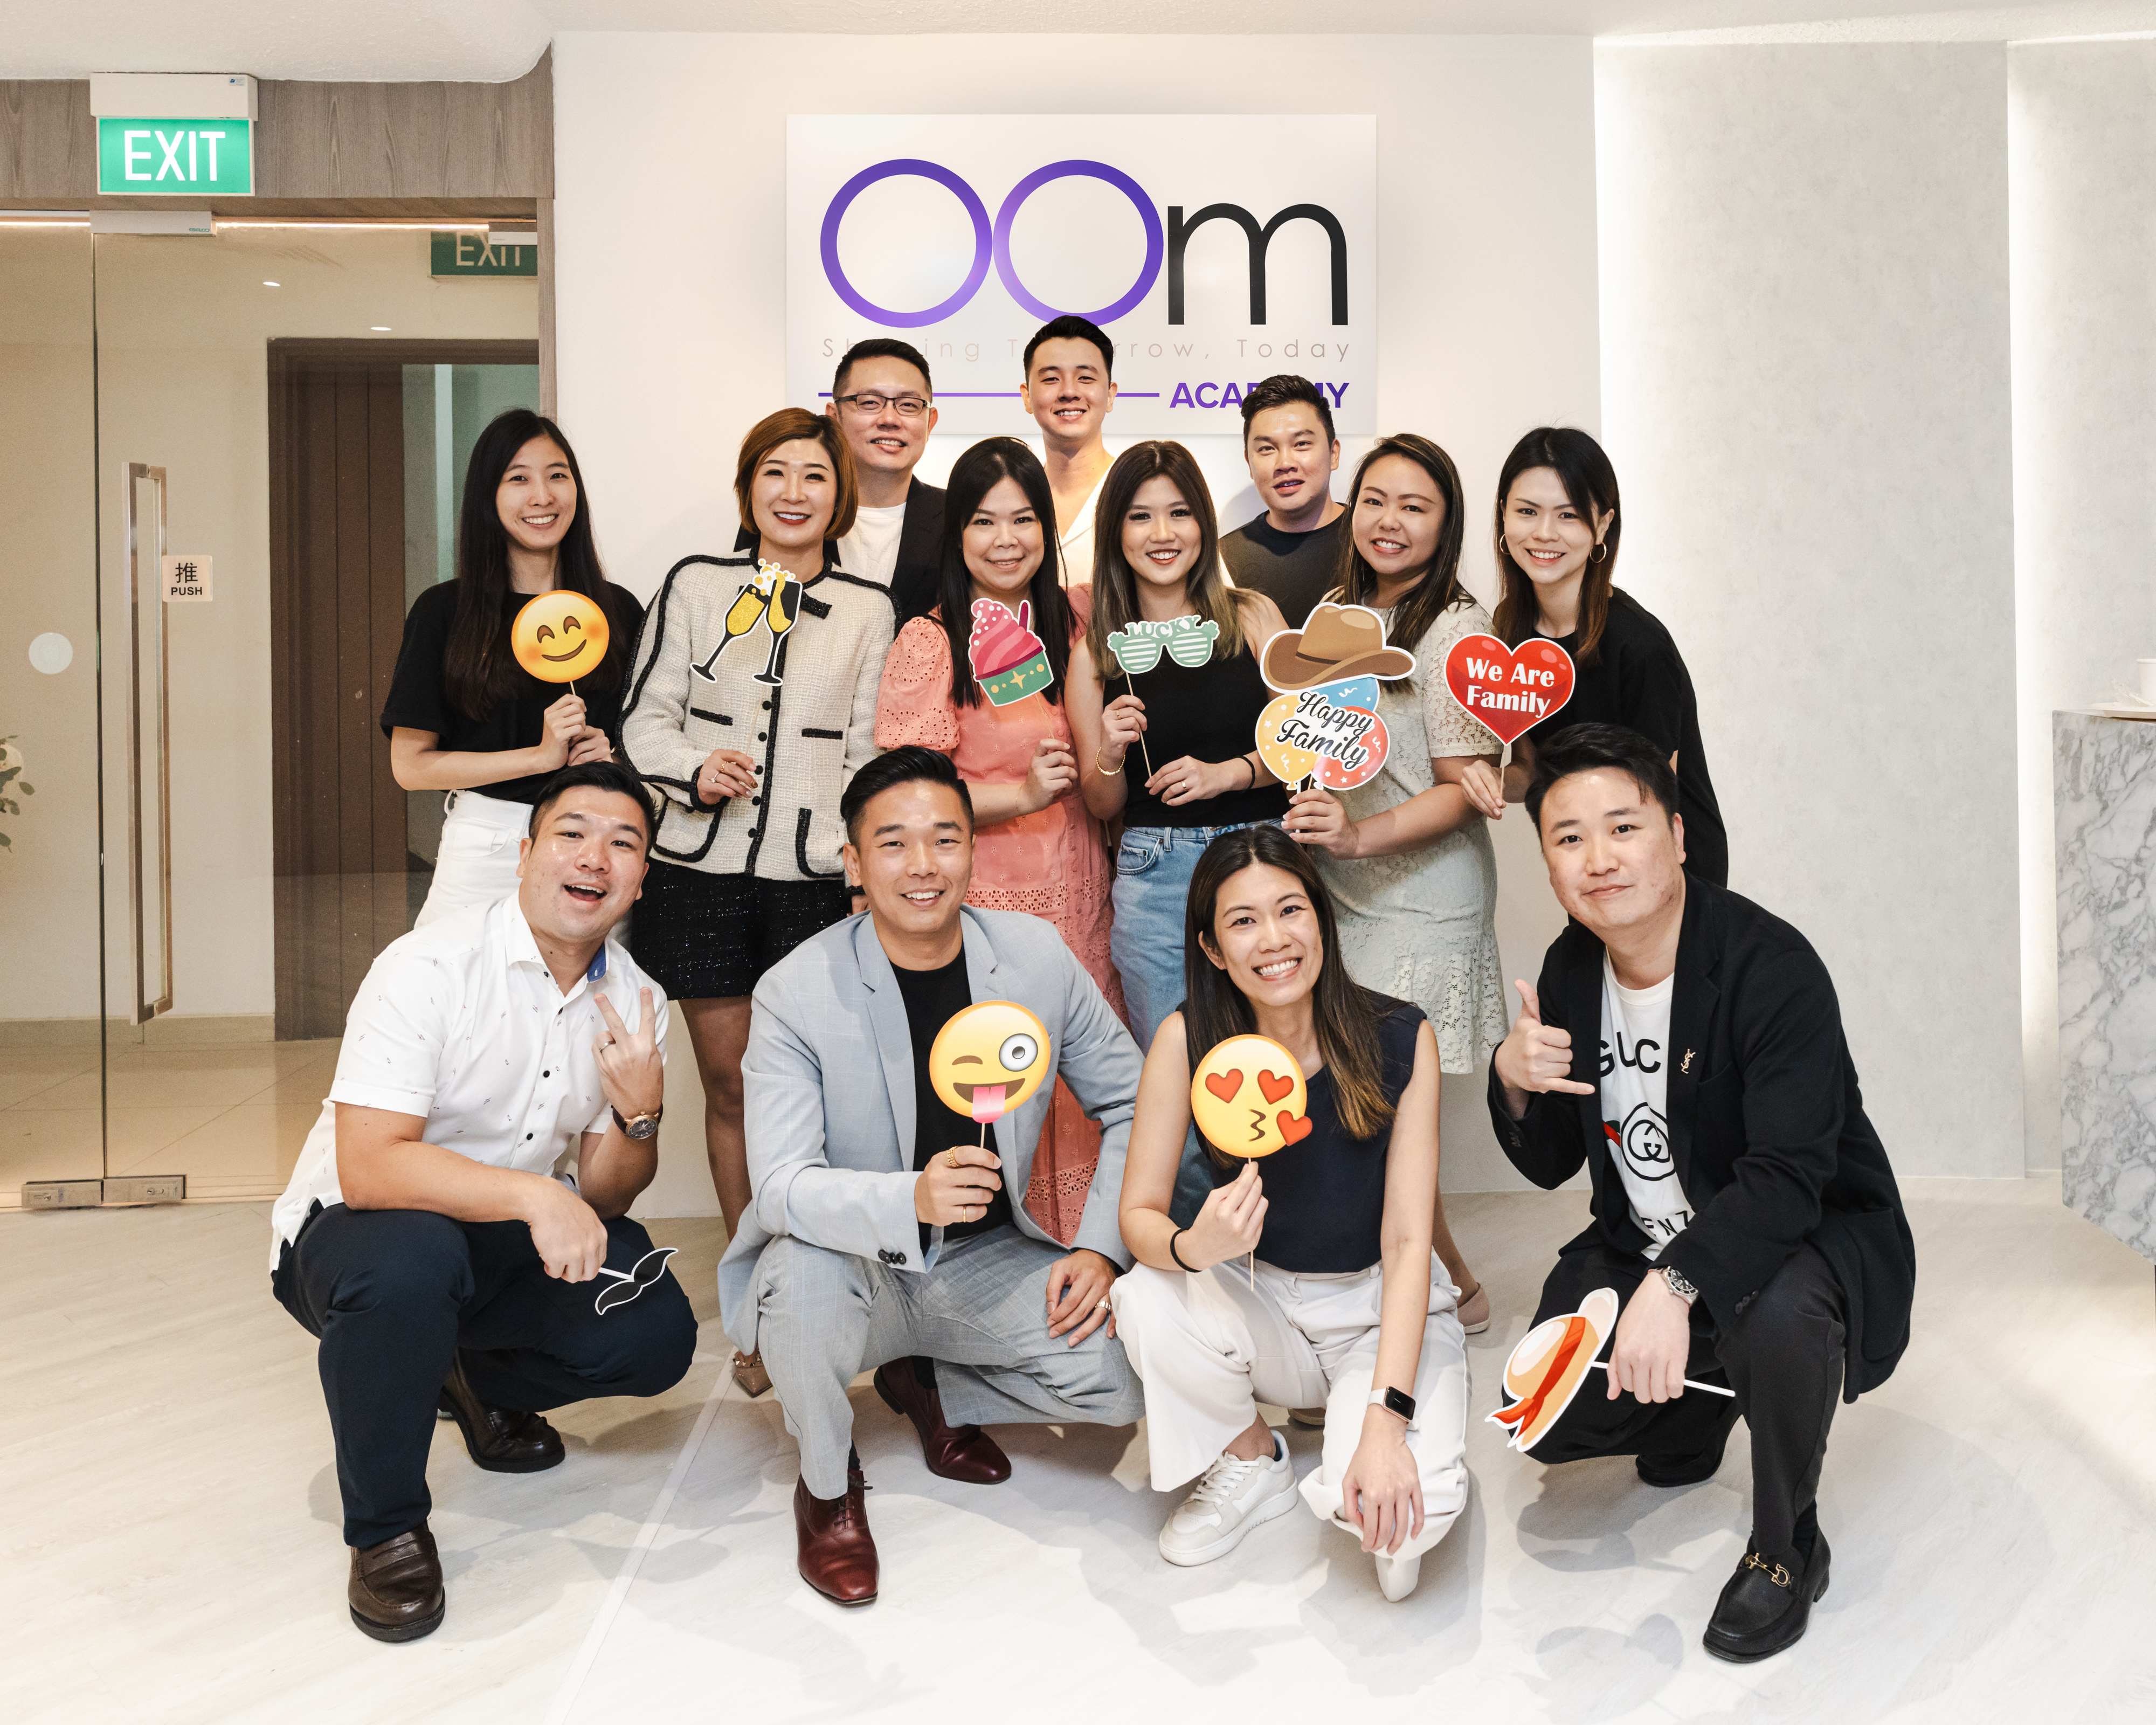 Group photo at the grand opening of OOm Academy